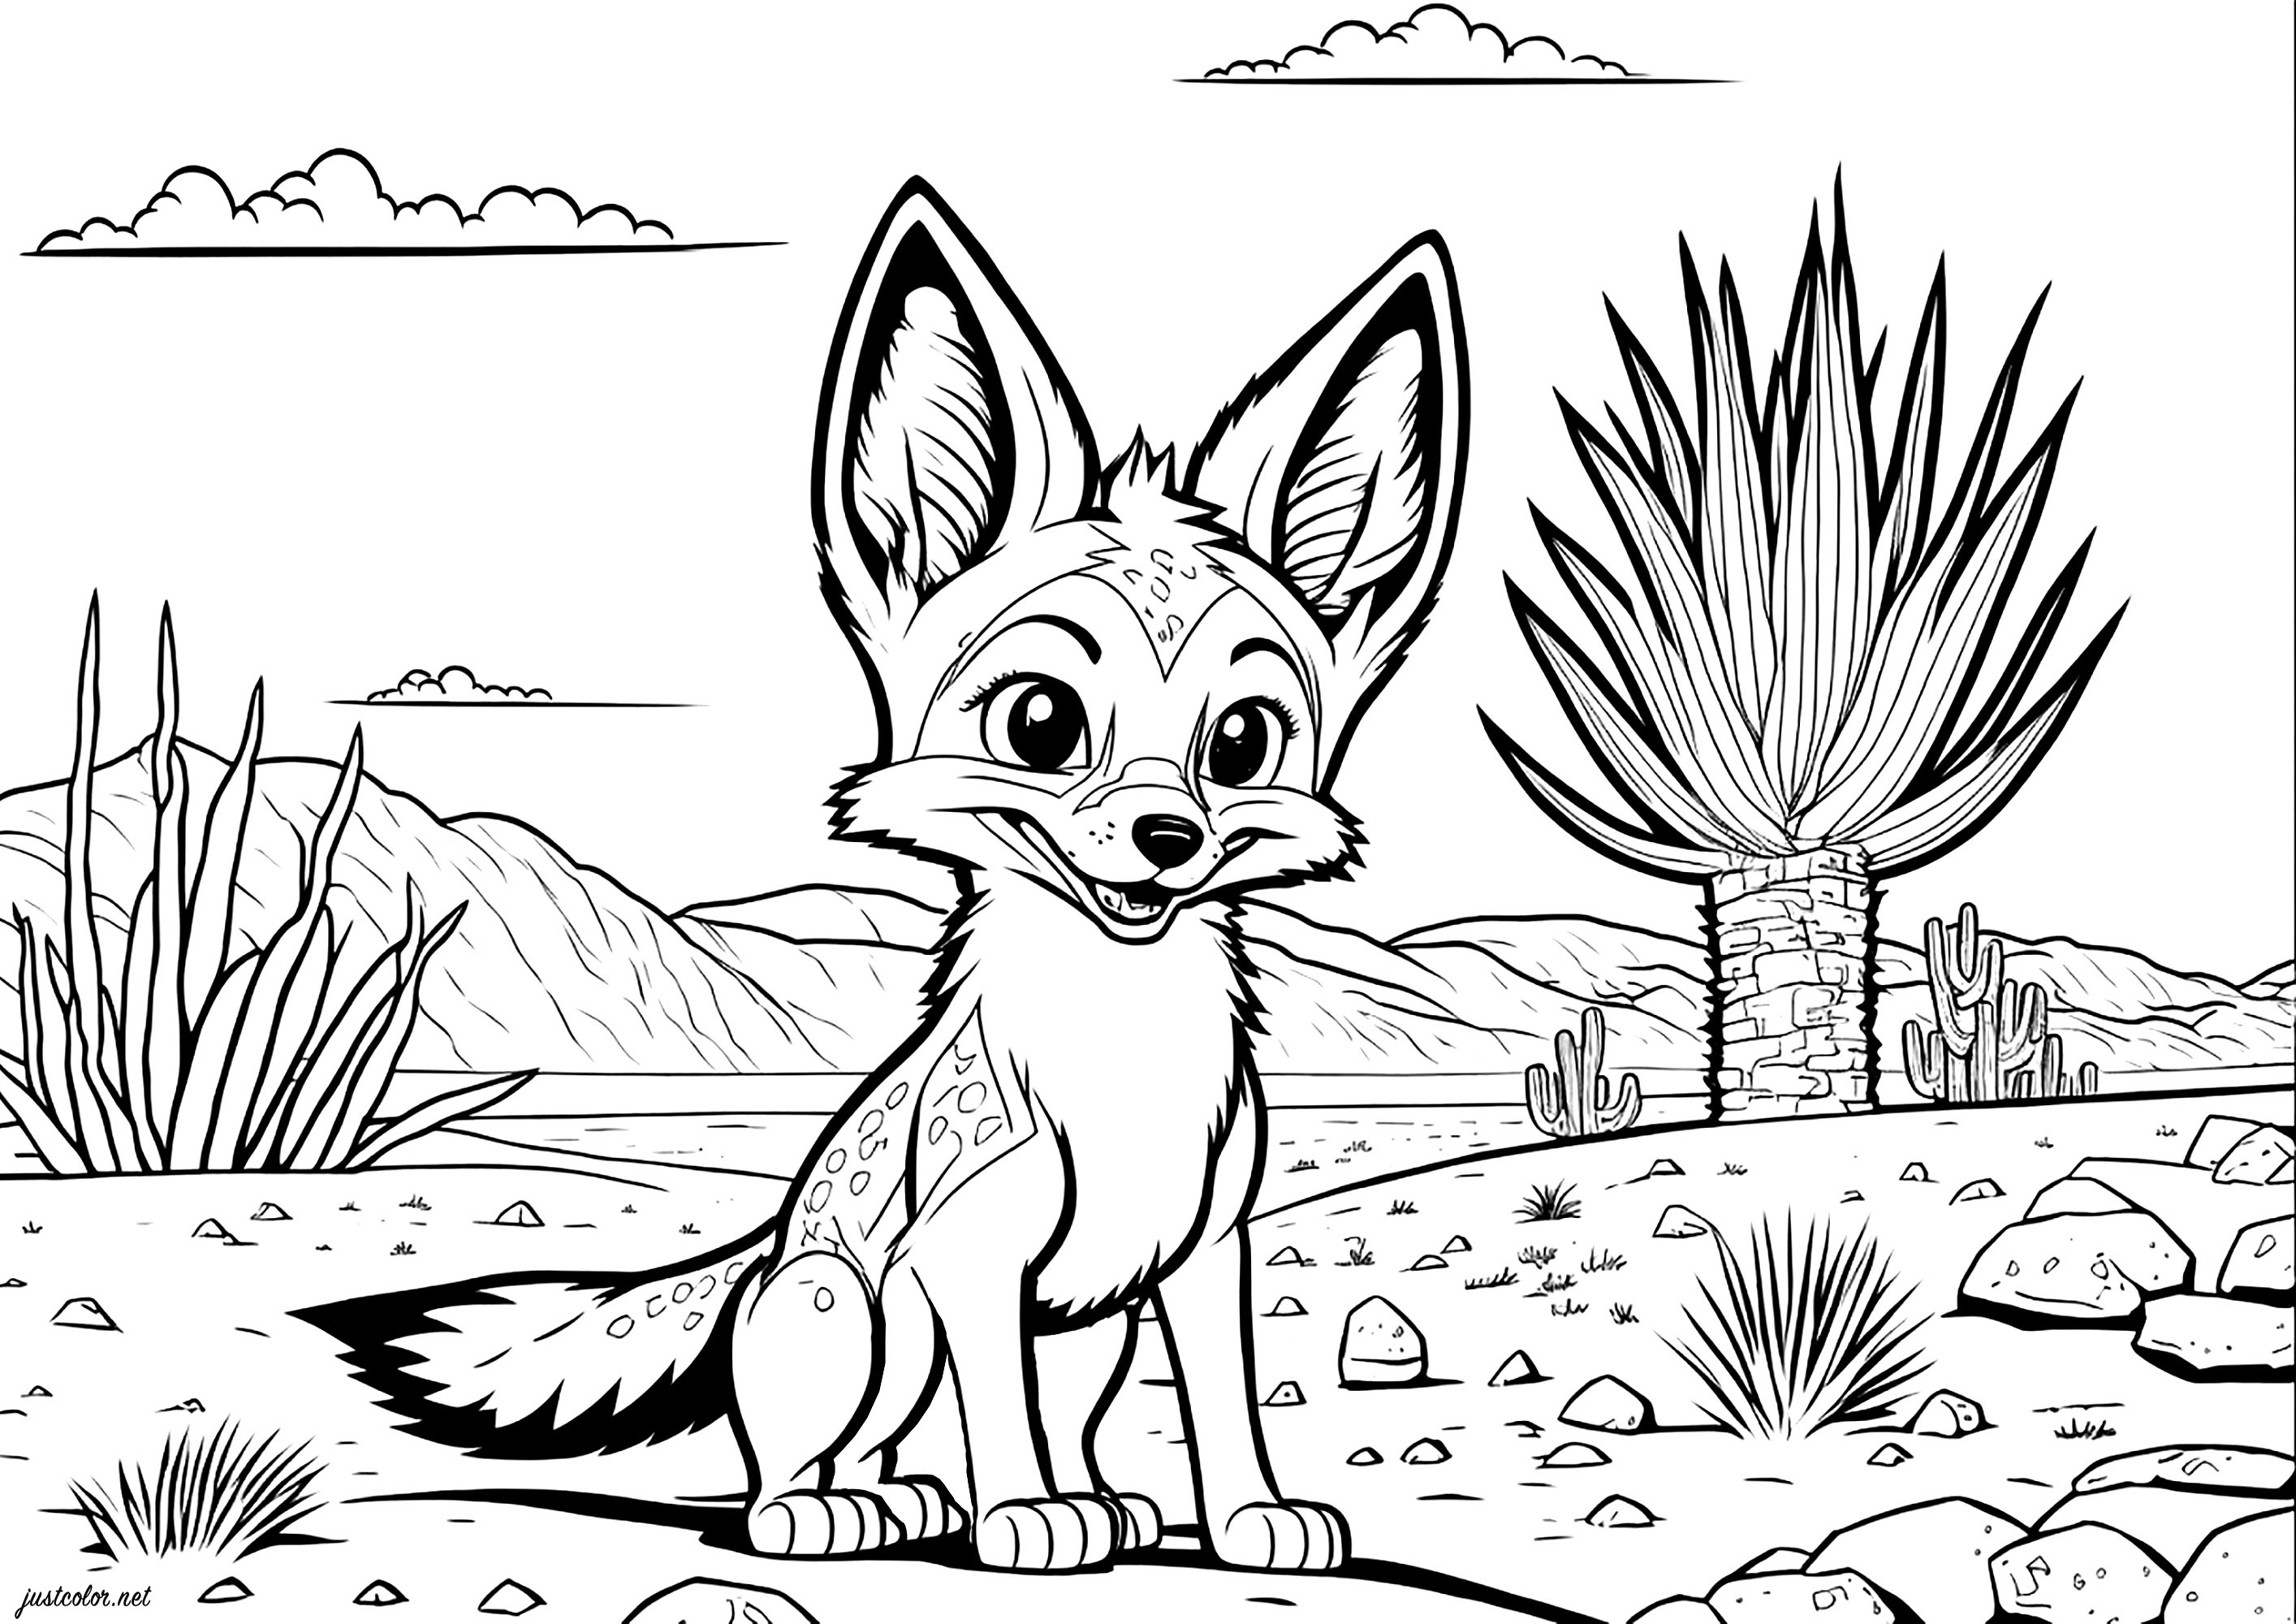 Coloring a cute fox in the desert. Let the courage of this young fox inspire you to explore new horizons and find your own path in the desert of life!